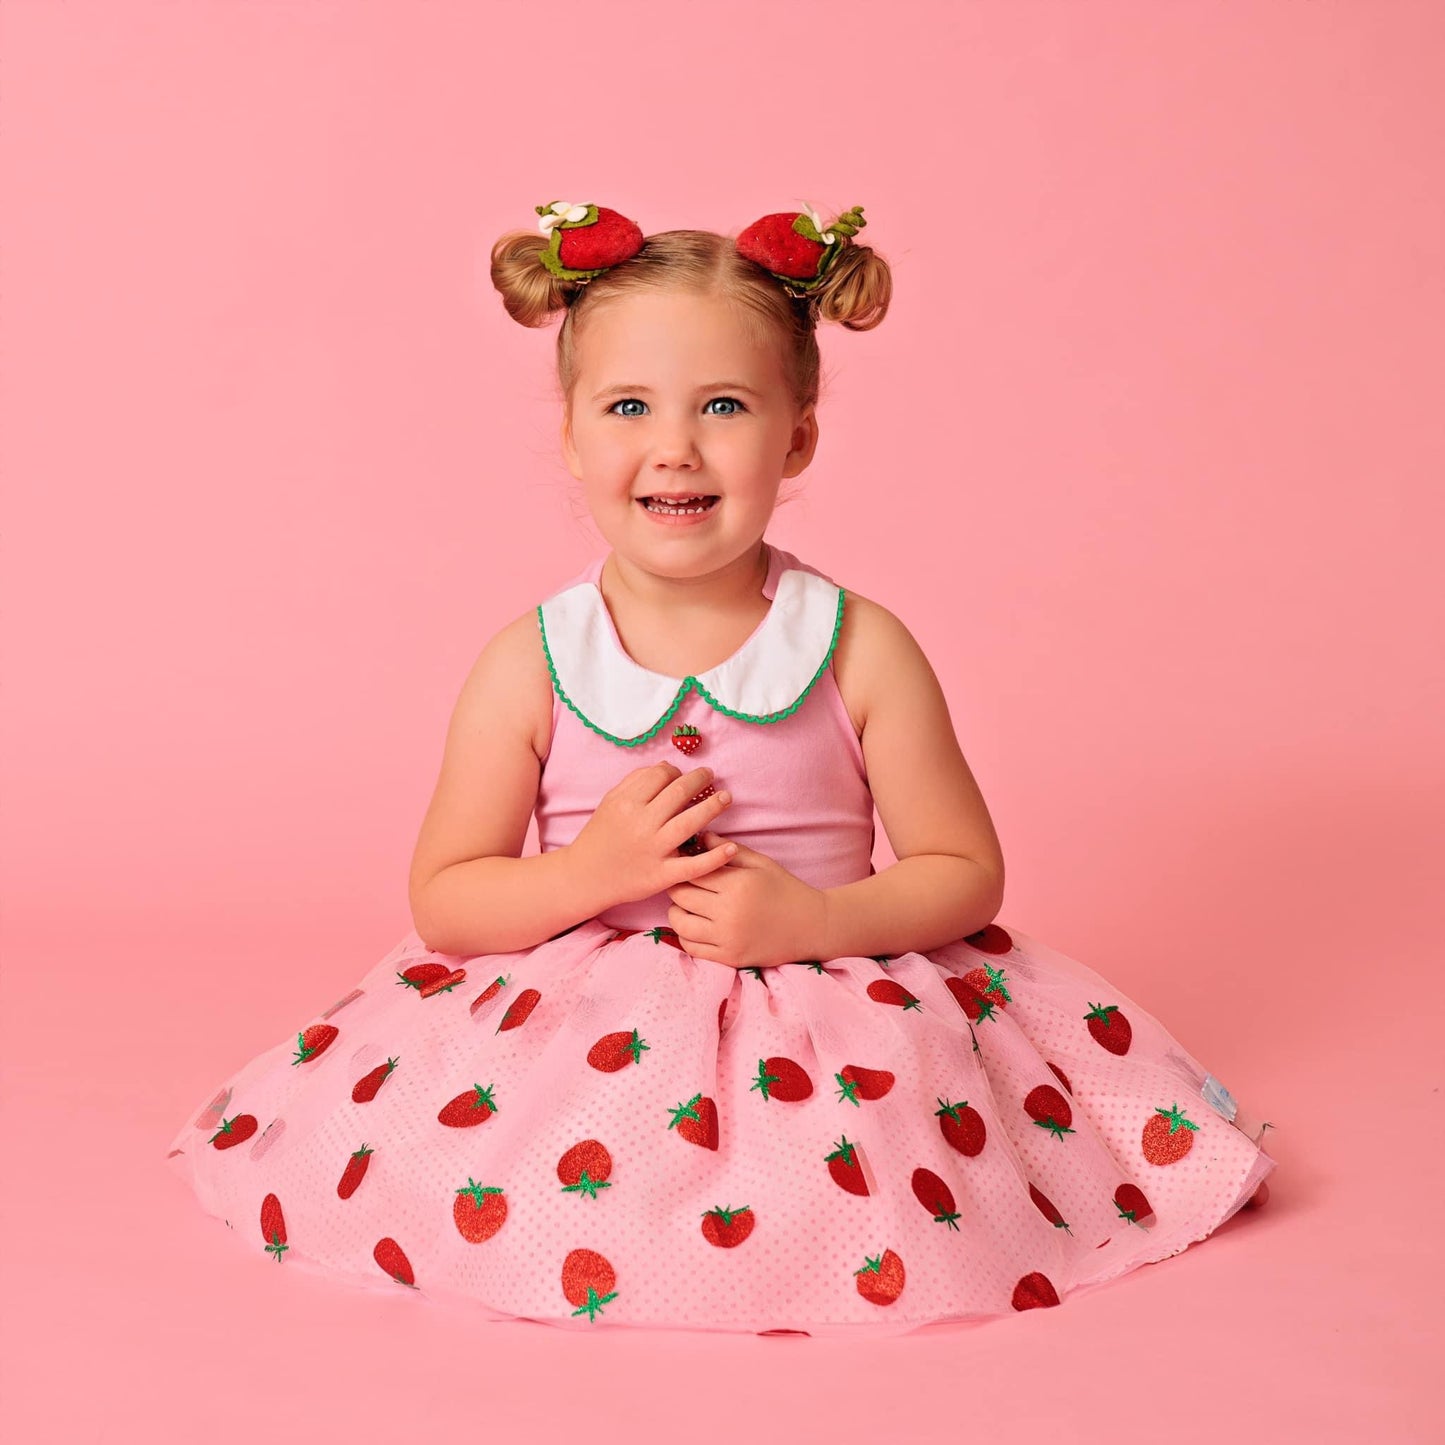 Strawberry Set With Flower Clip